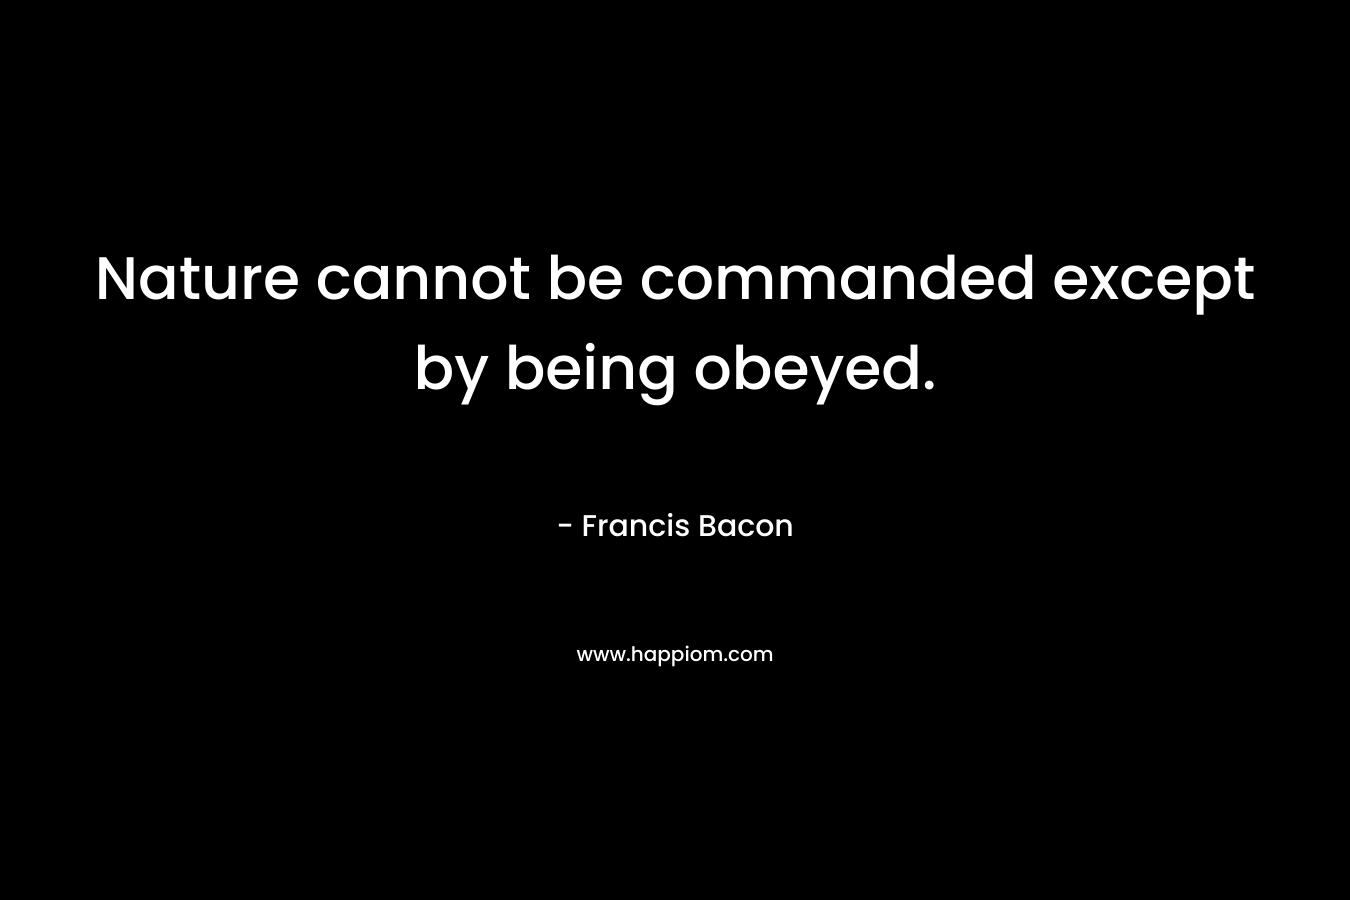 Nature cannot be commanded except by being obeyed. – Francis Bacon